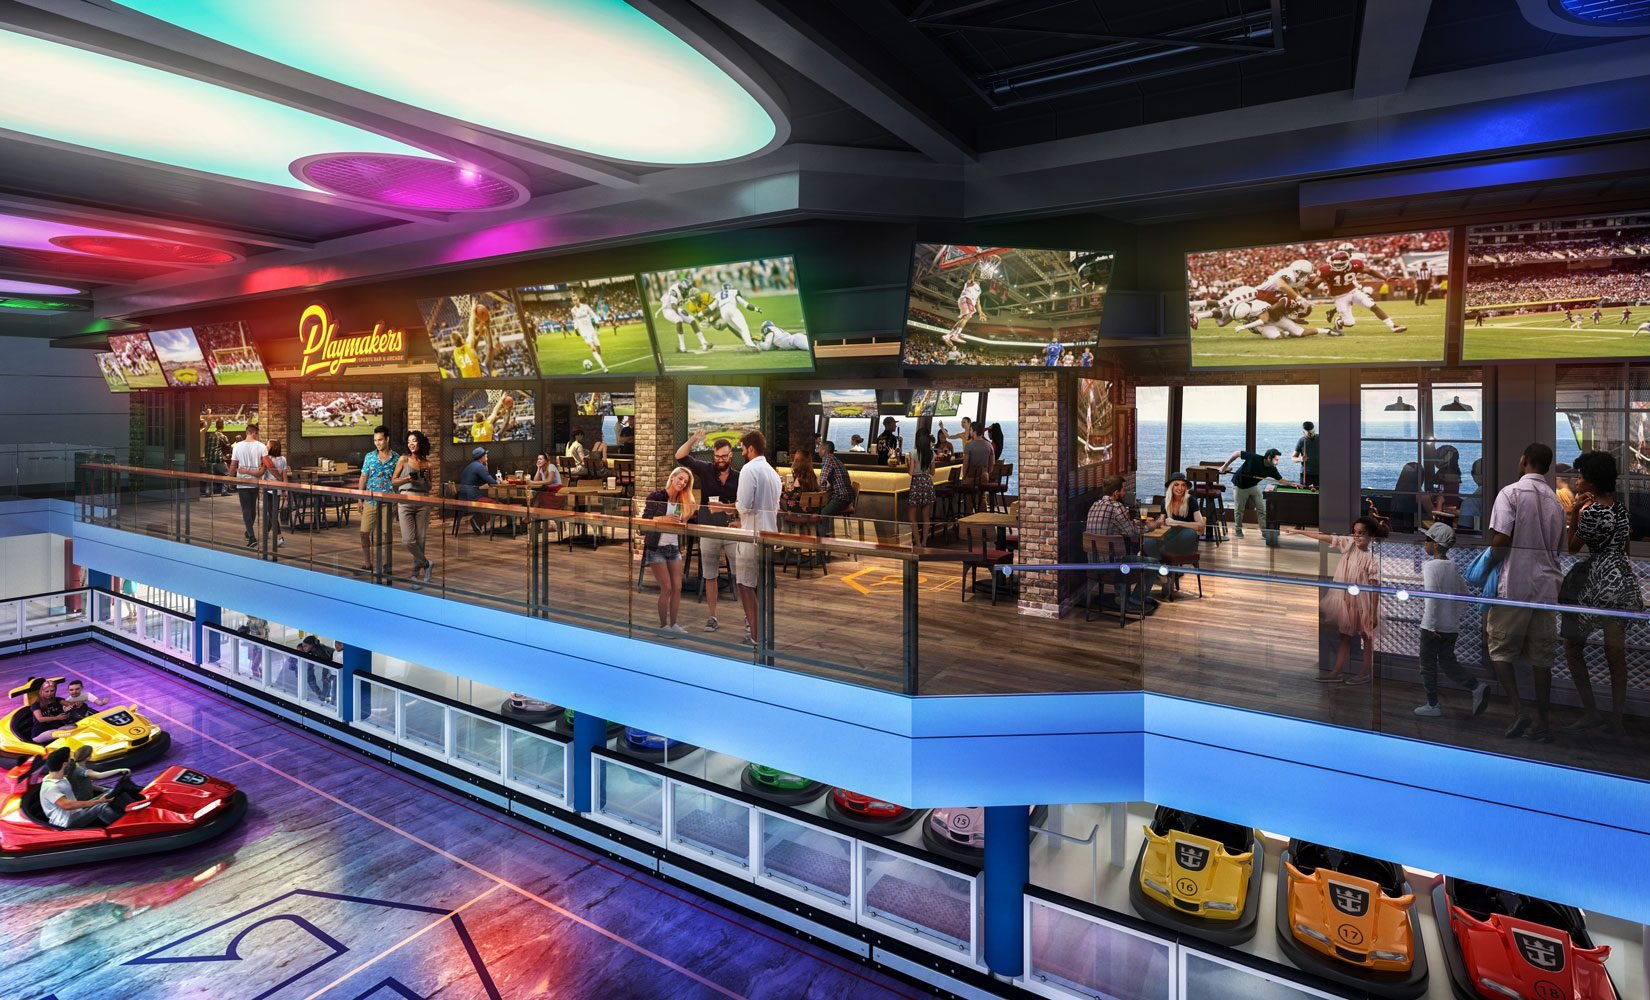 5 ways Royal Caribbean's Odyssey of the Seas will be different from